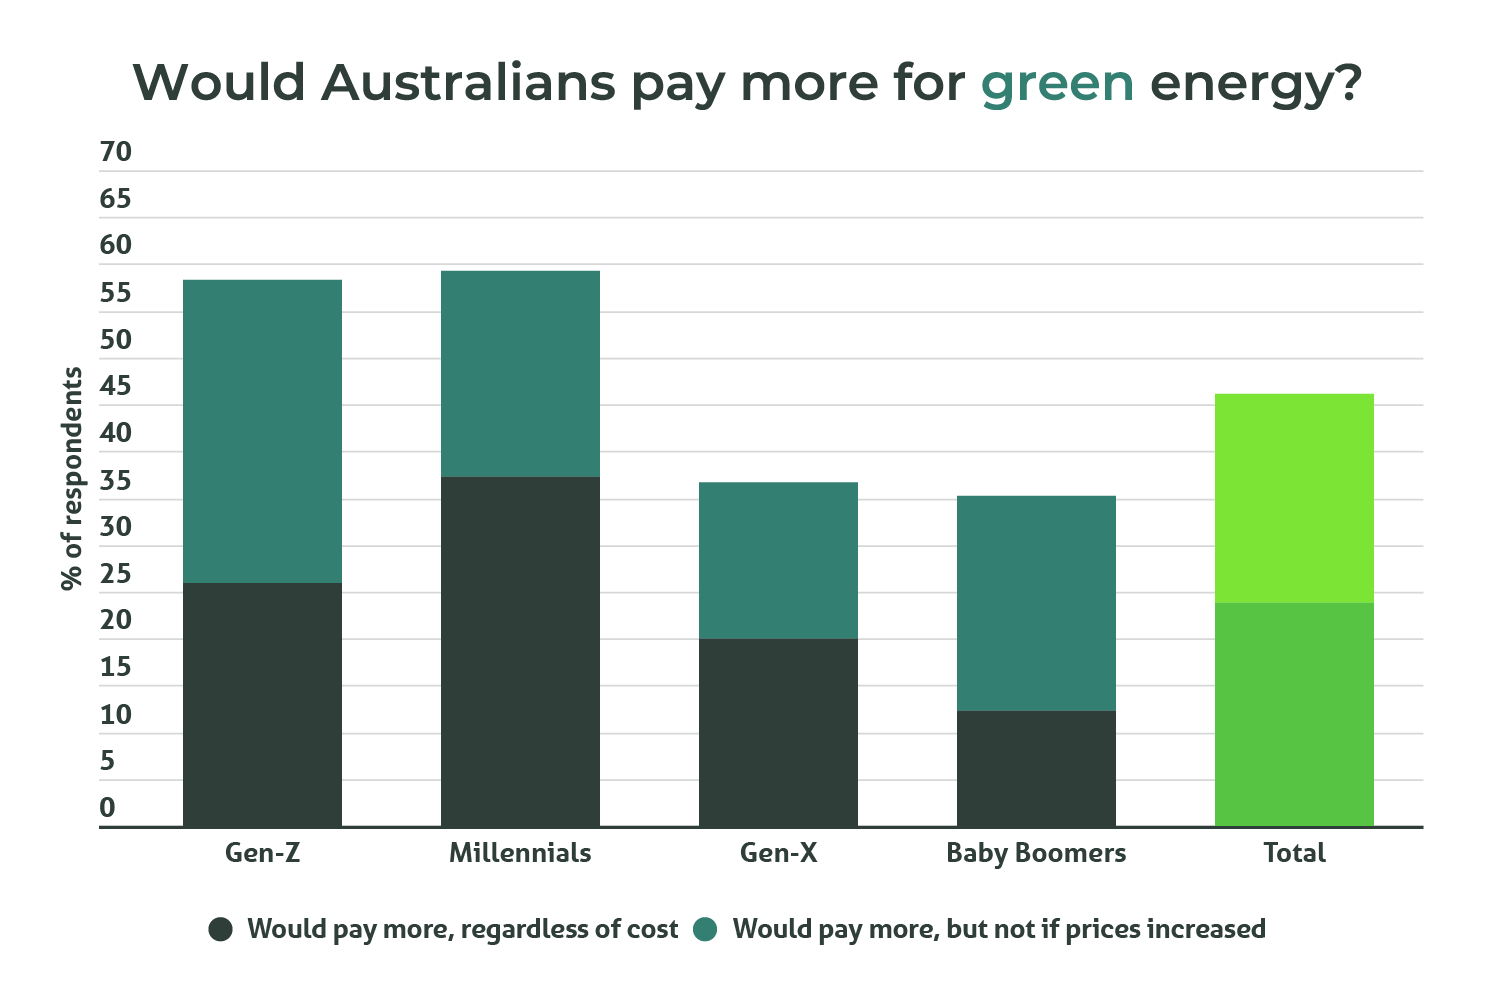 A column graph showing what percentage of Australians would pay more for green energy by age group